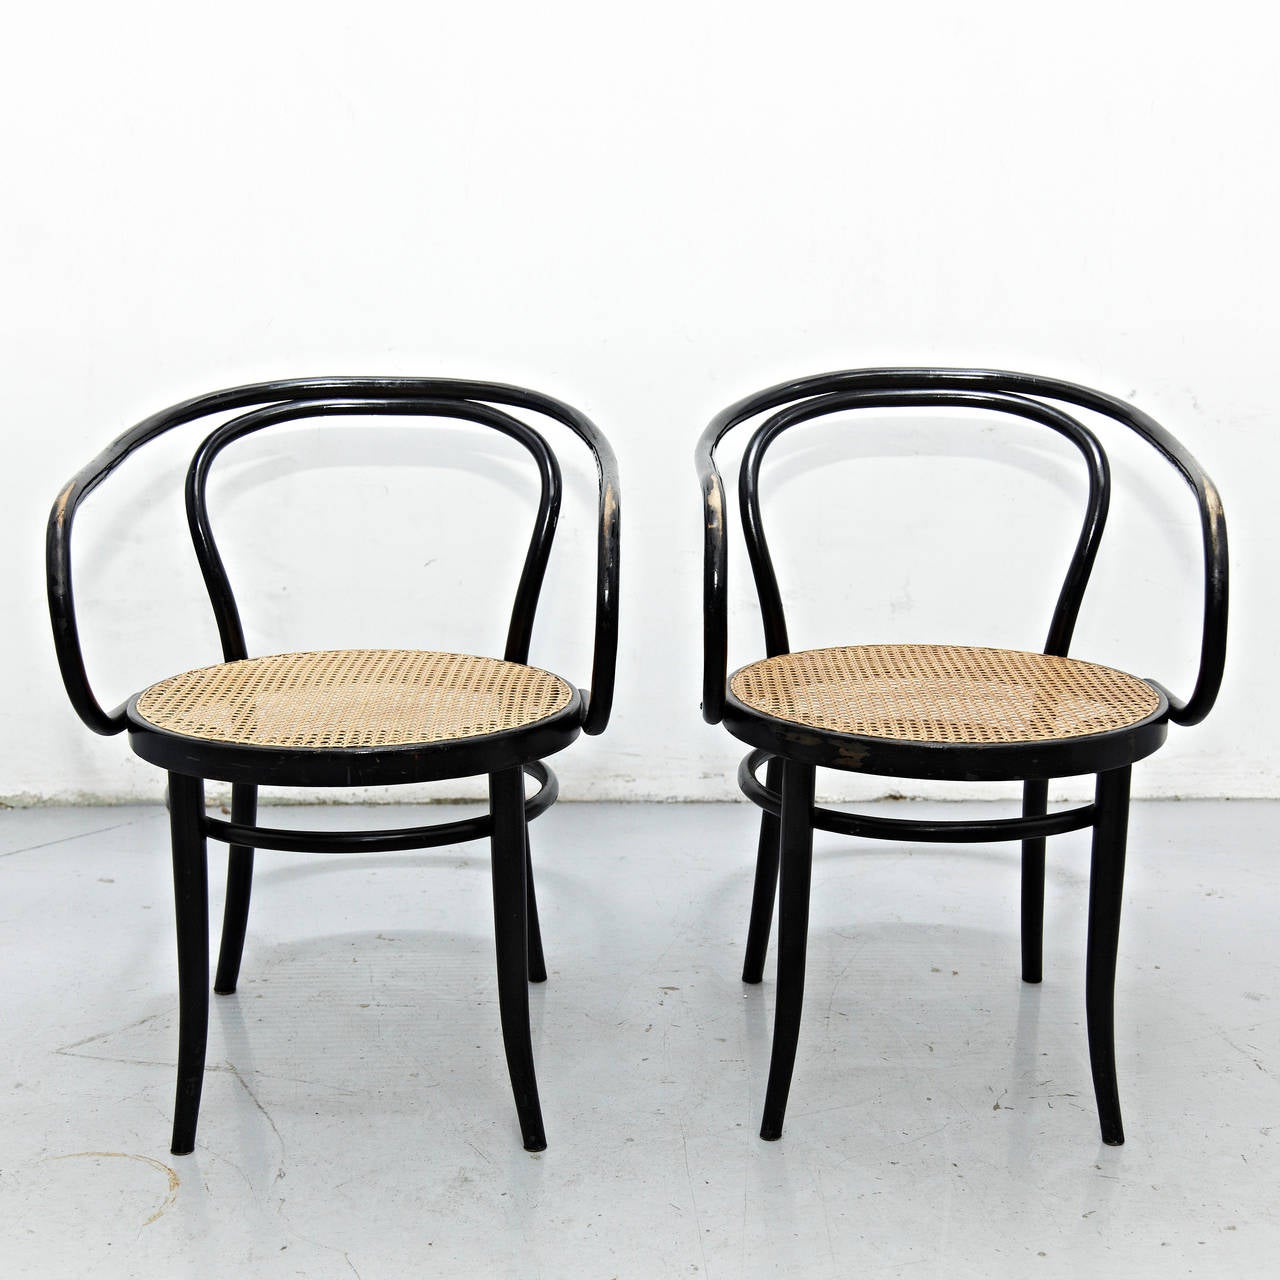 Early 20th Century Set of Four Thonet 209 Armchair by Auguste Thonet for Thonet, circa 1900